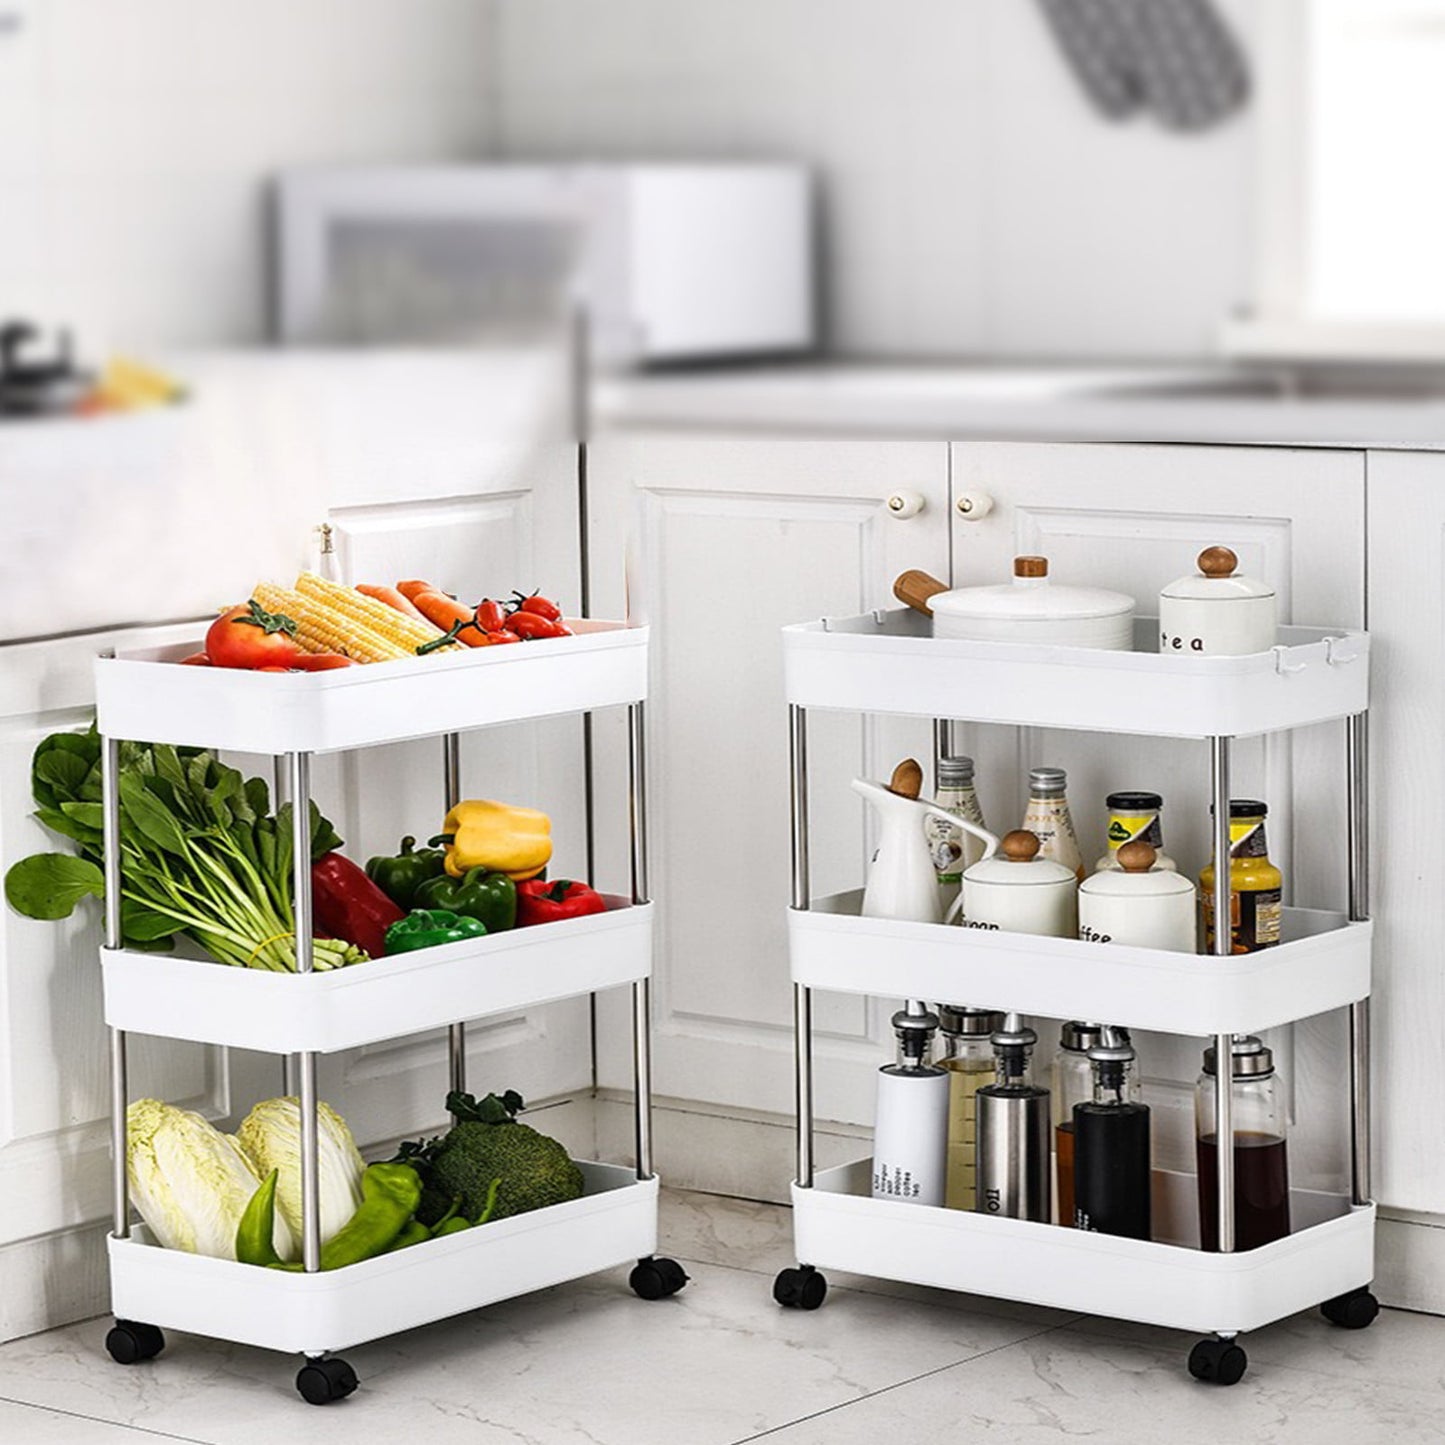 Slim Rolling Storage Cart 3 Tier, Rolling Storage Trolley with Side Hoops, Bathroom Organizer Mobile Shelving Unit Utility Cart Tower Rack for Kitchen Laundry Narrow Places, White